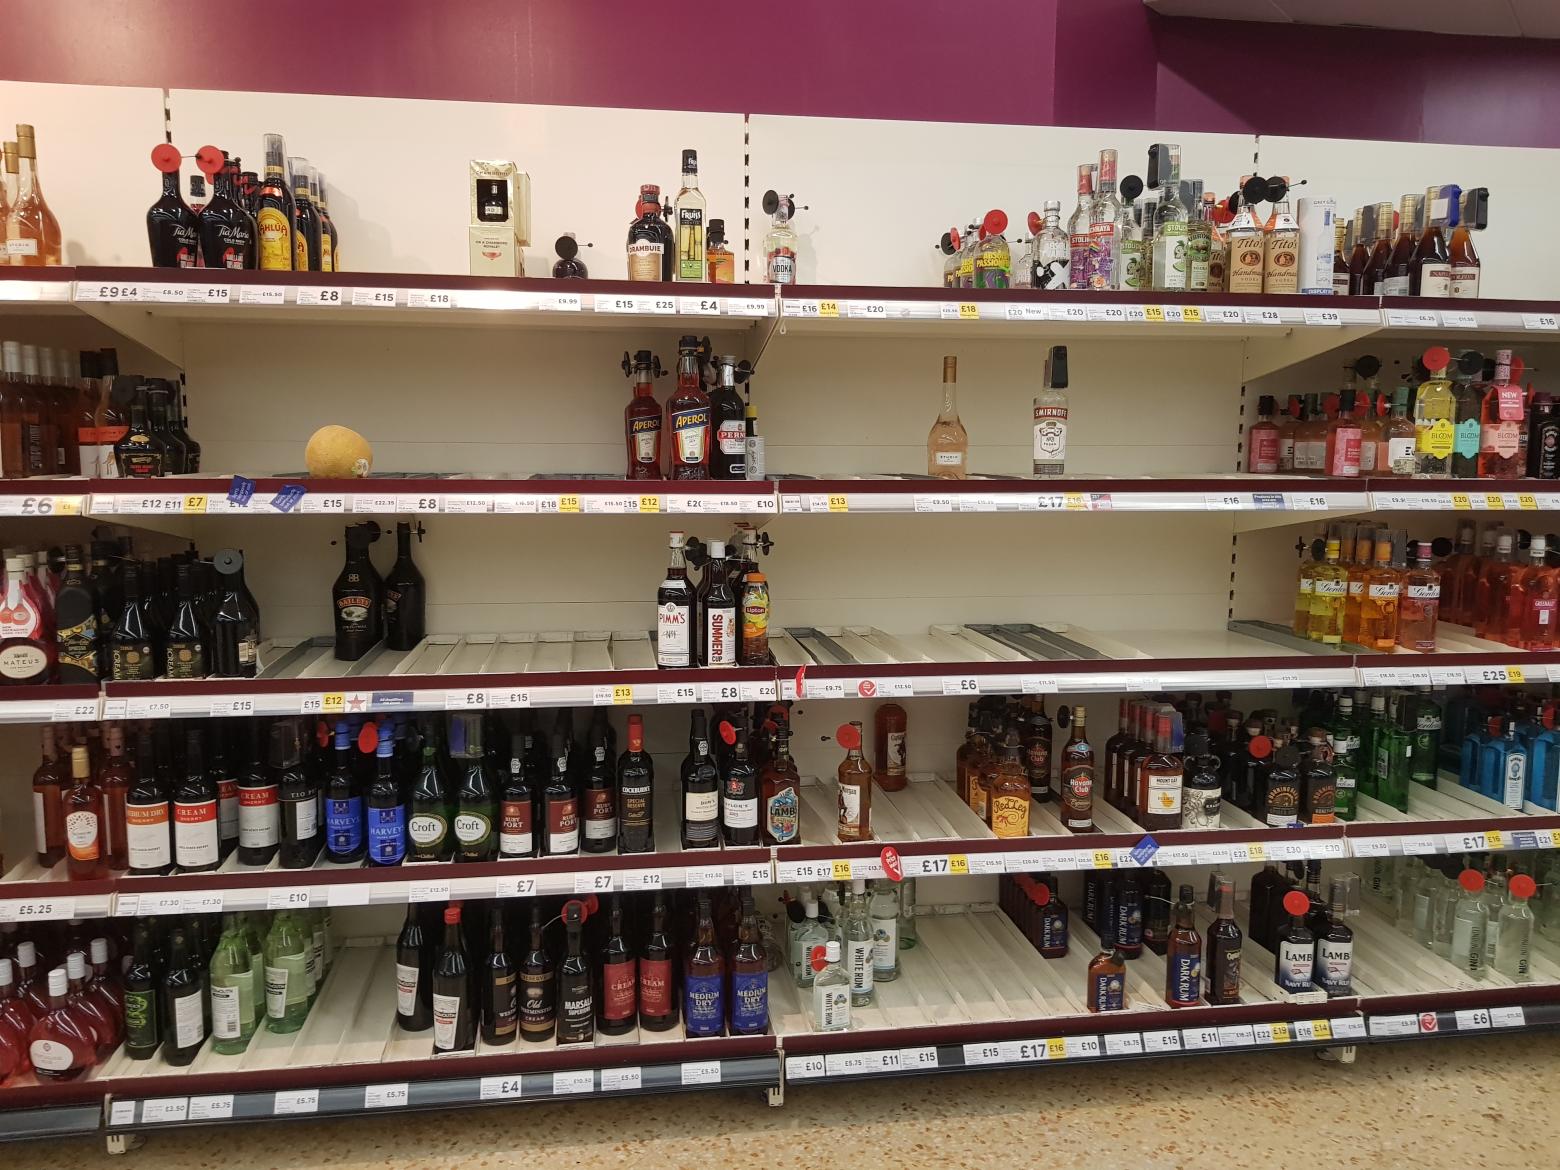 Tesco's Shelves Are Bare. There's No (Good) Alcohol!